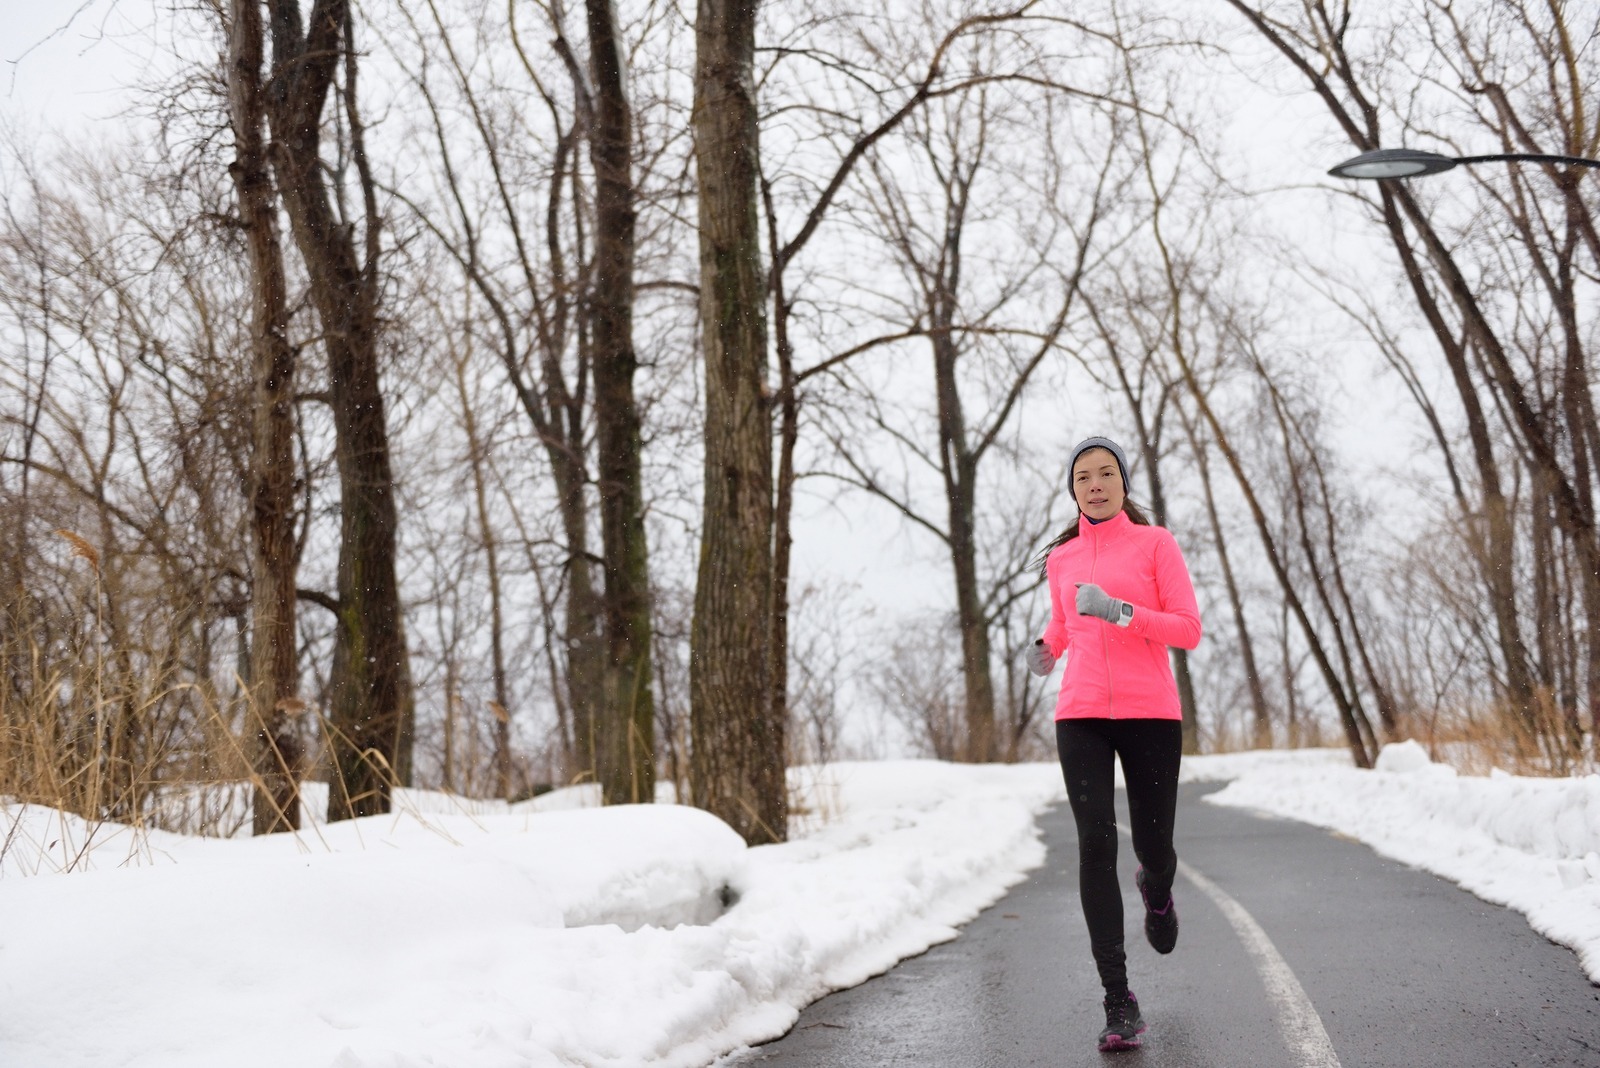 Woman jogging in snowy city park - winter fitness. Female athlet